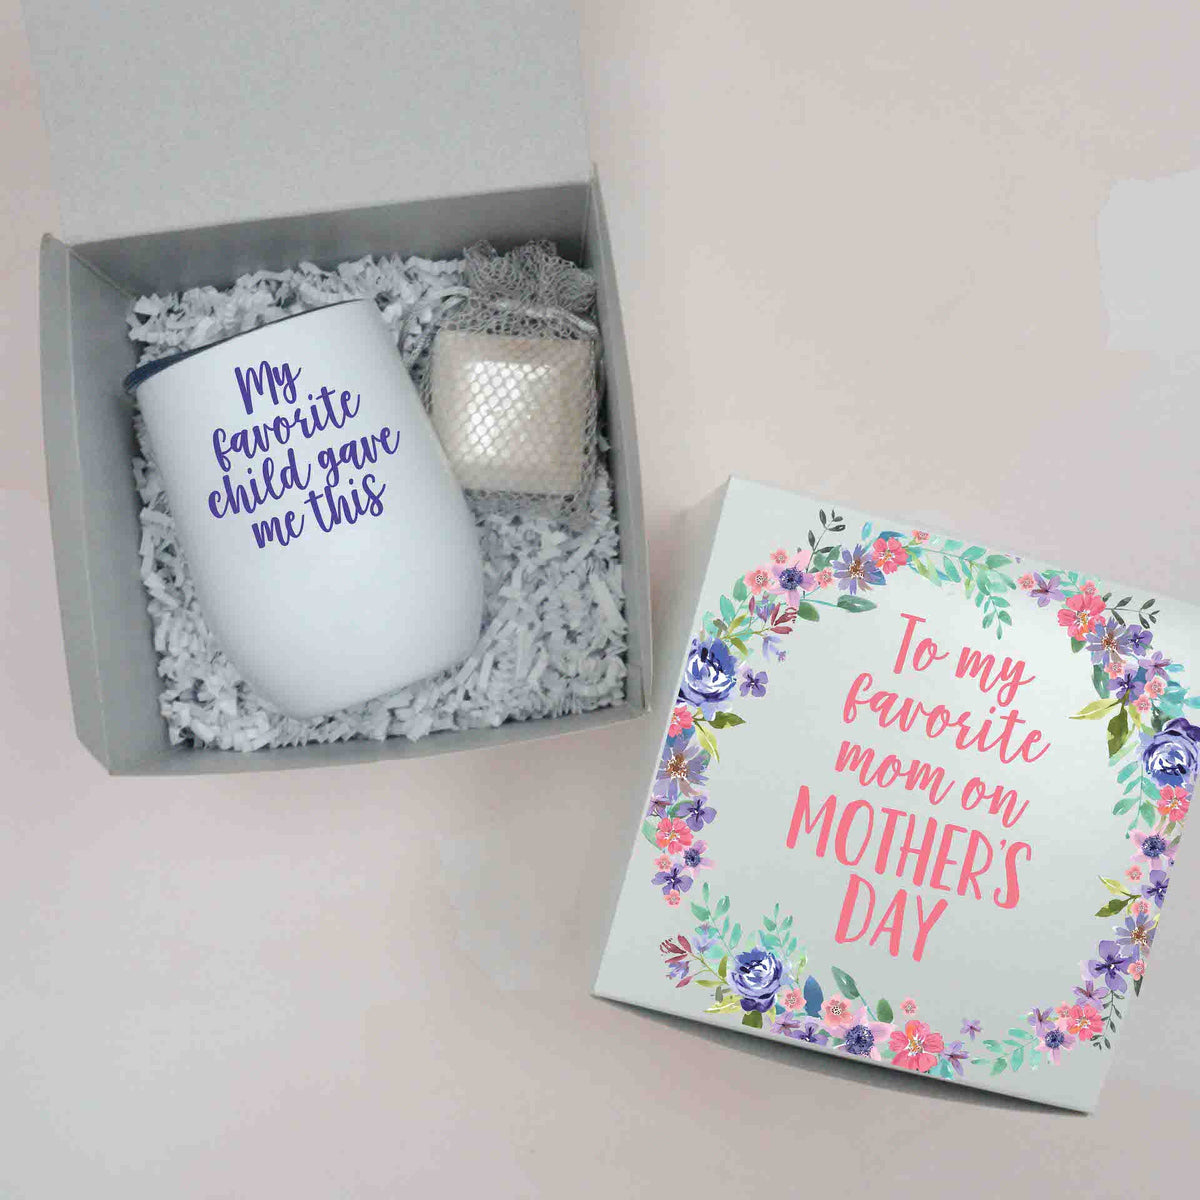 PERSONALISED CANDLE VANILLA SCENTED MOTHERS DAY QUOTE MUM BIRTHDAY  ANNIVERSARY